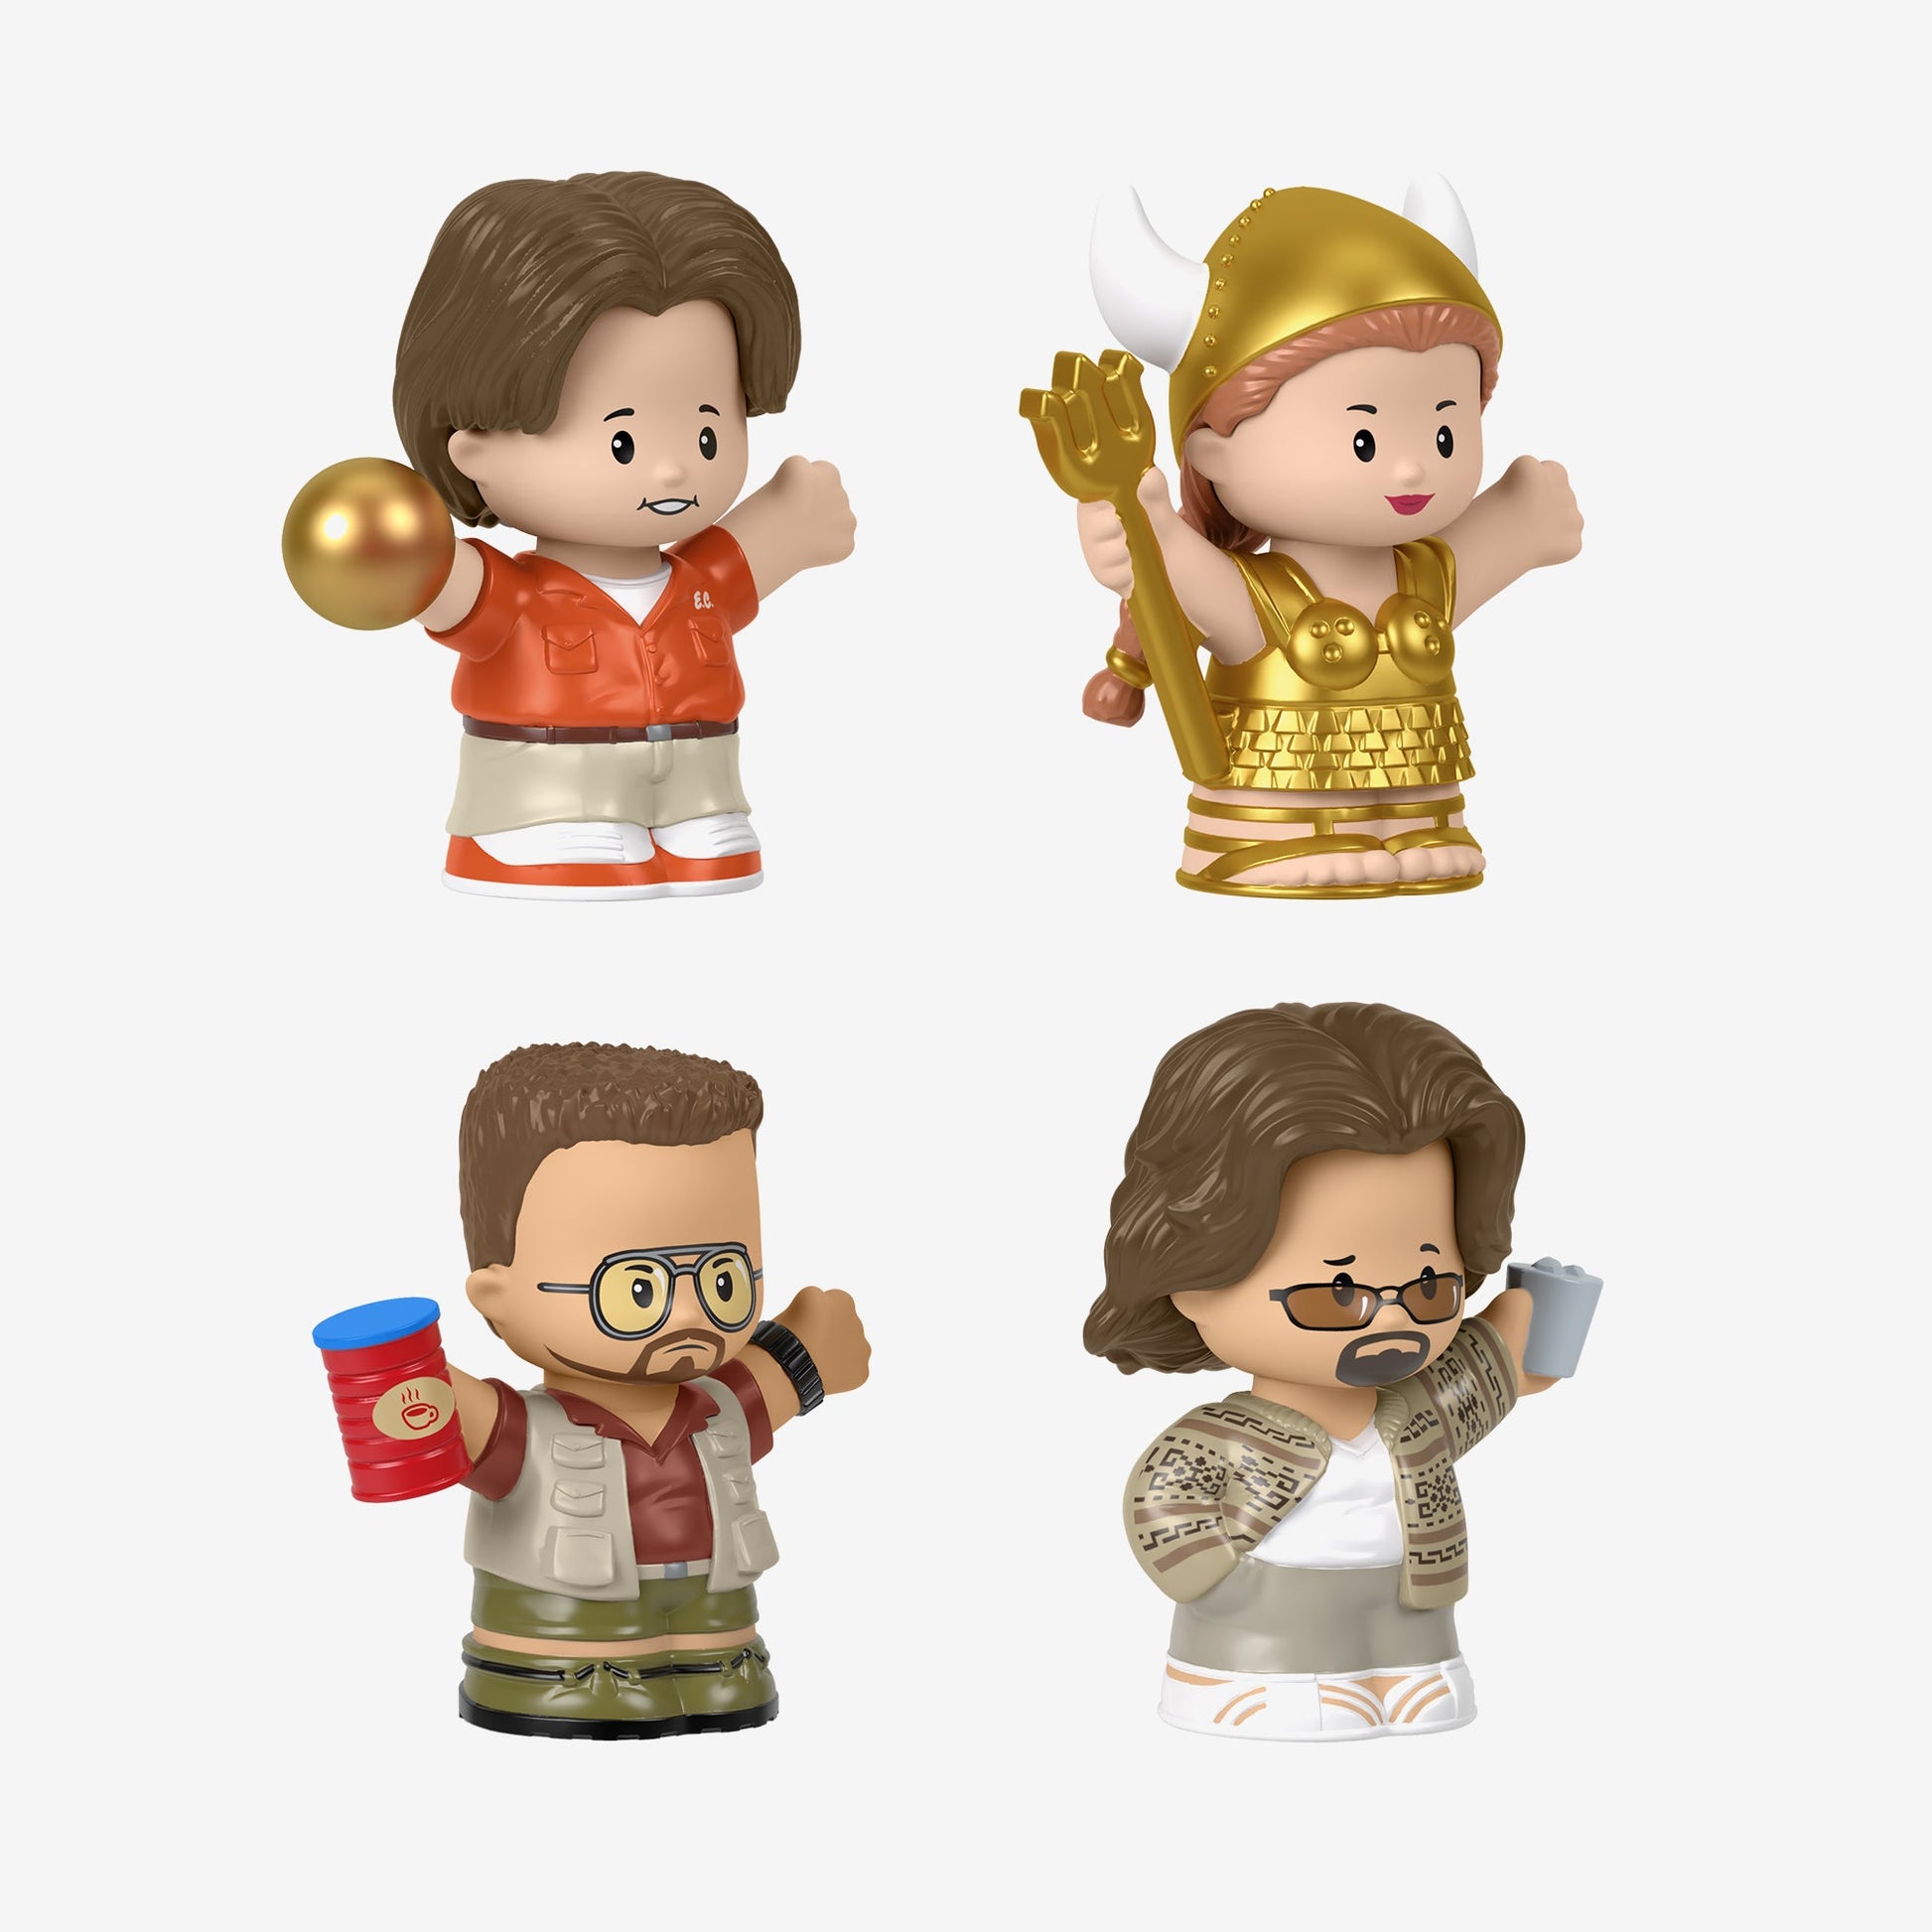 New Little People Collector's Sets on Sale